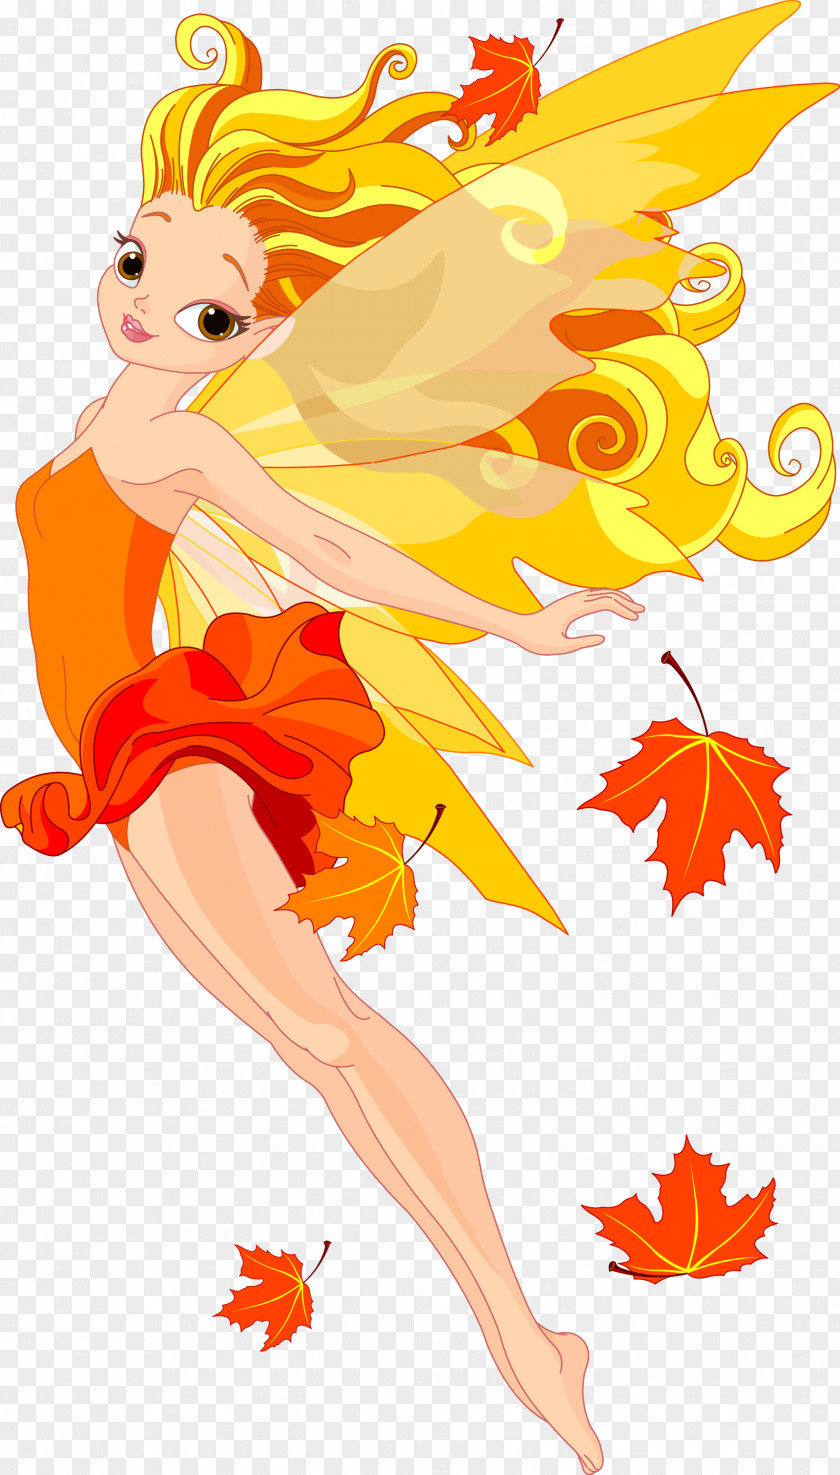 Background Cartoon Fairy Fantasy Pictures Royalty-free Clip Art PNG